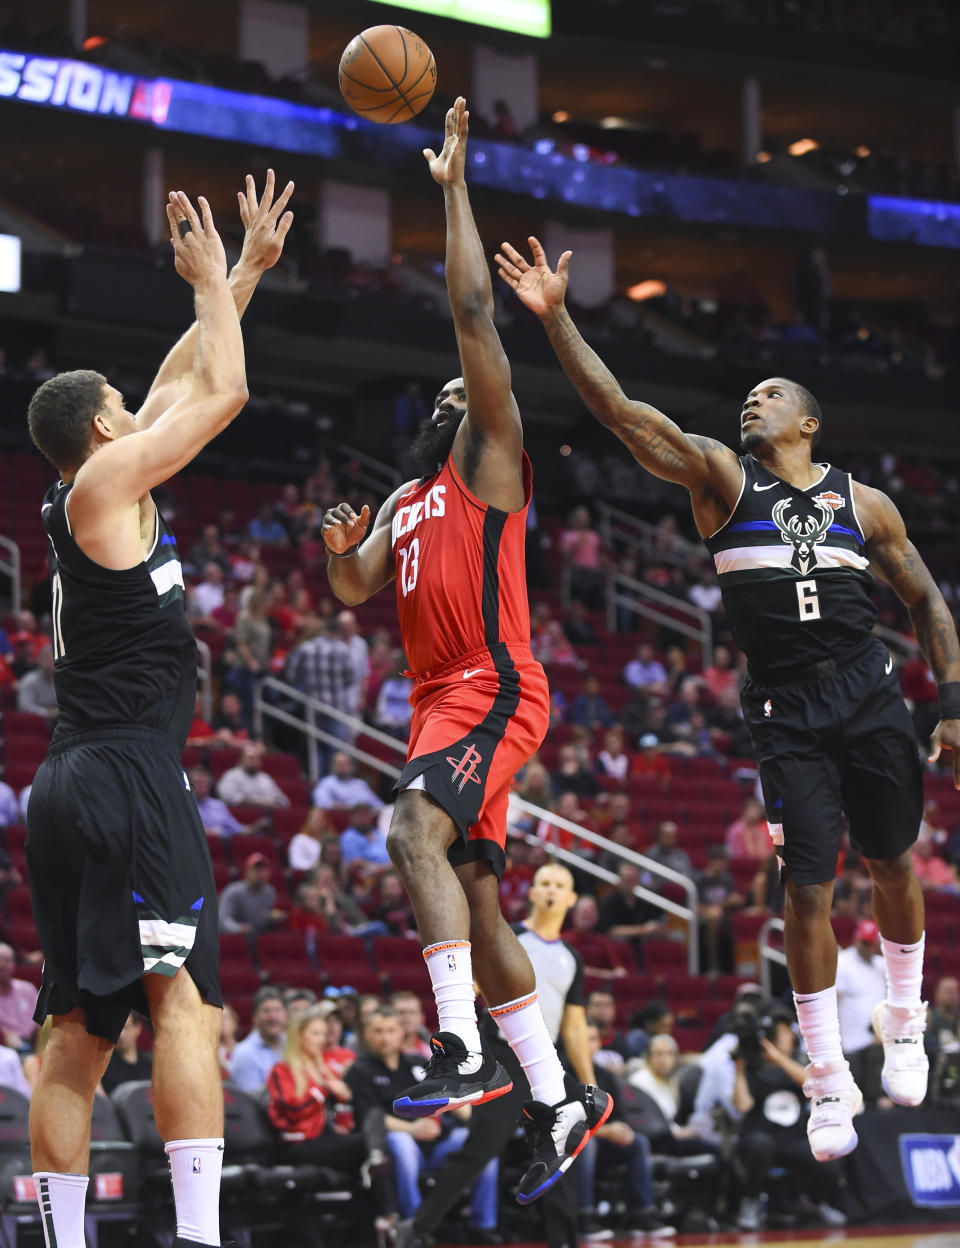 Houston Rockets guard James Harden, center, shoots as Milwaukee Bucks center Brook Lopez, left, and guard Eric Bledsoe defend during the first half of an NBA basketball game Thursday, Oct. 24, 2019, in Houston. (AP Photo/Eric Christian Smith)